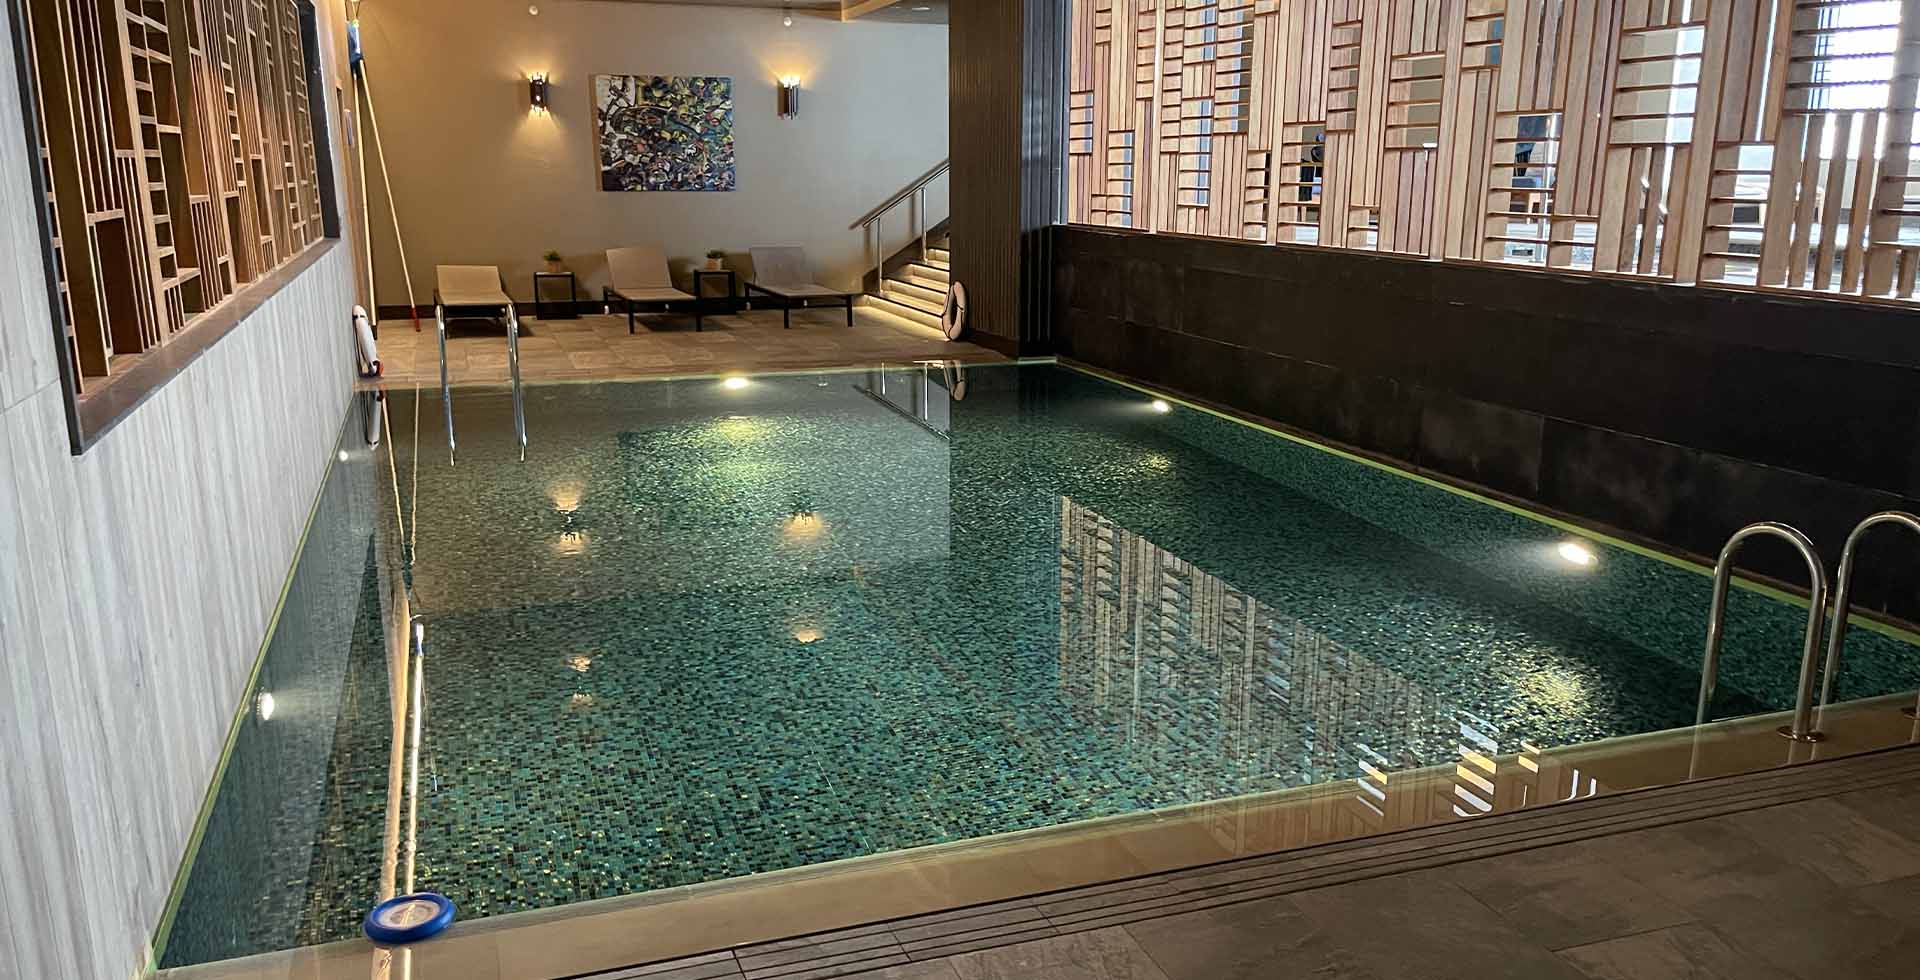 Hilton Pool Elegance: Sauna Dekor introduces bespoke swimming pool excellence, meticulously designed and built to elevate aquatic experiences at Hilton Hotels with unparalleled sophistication.